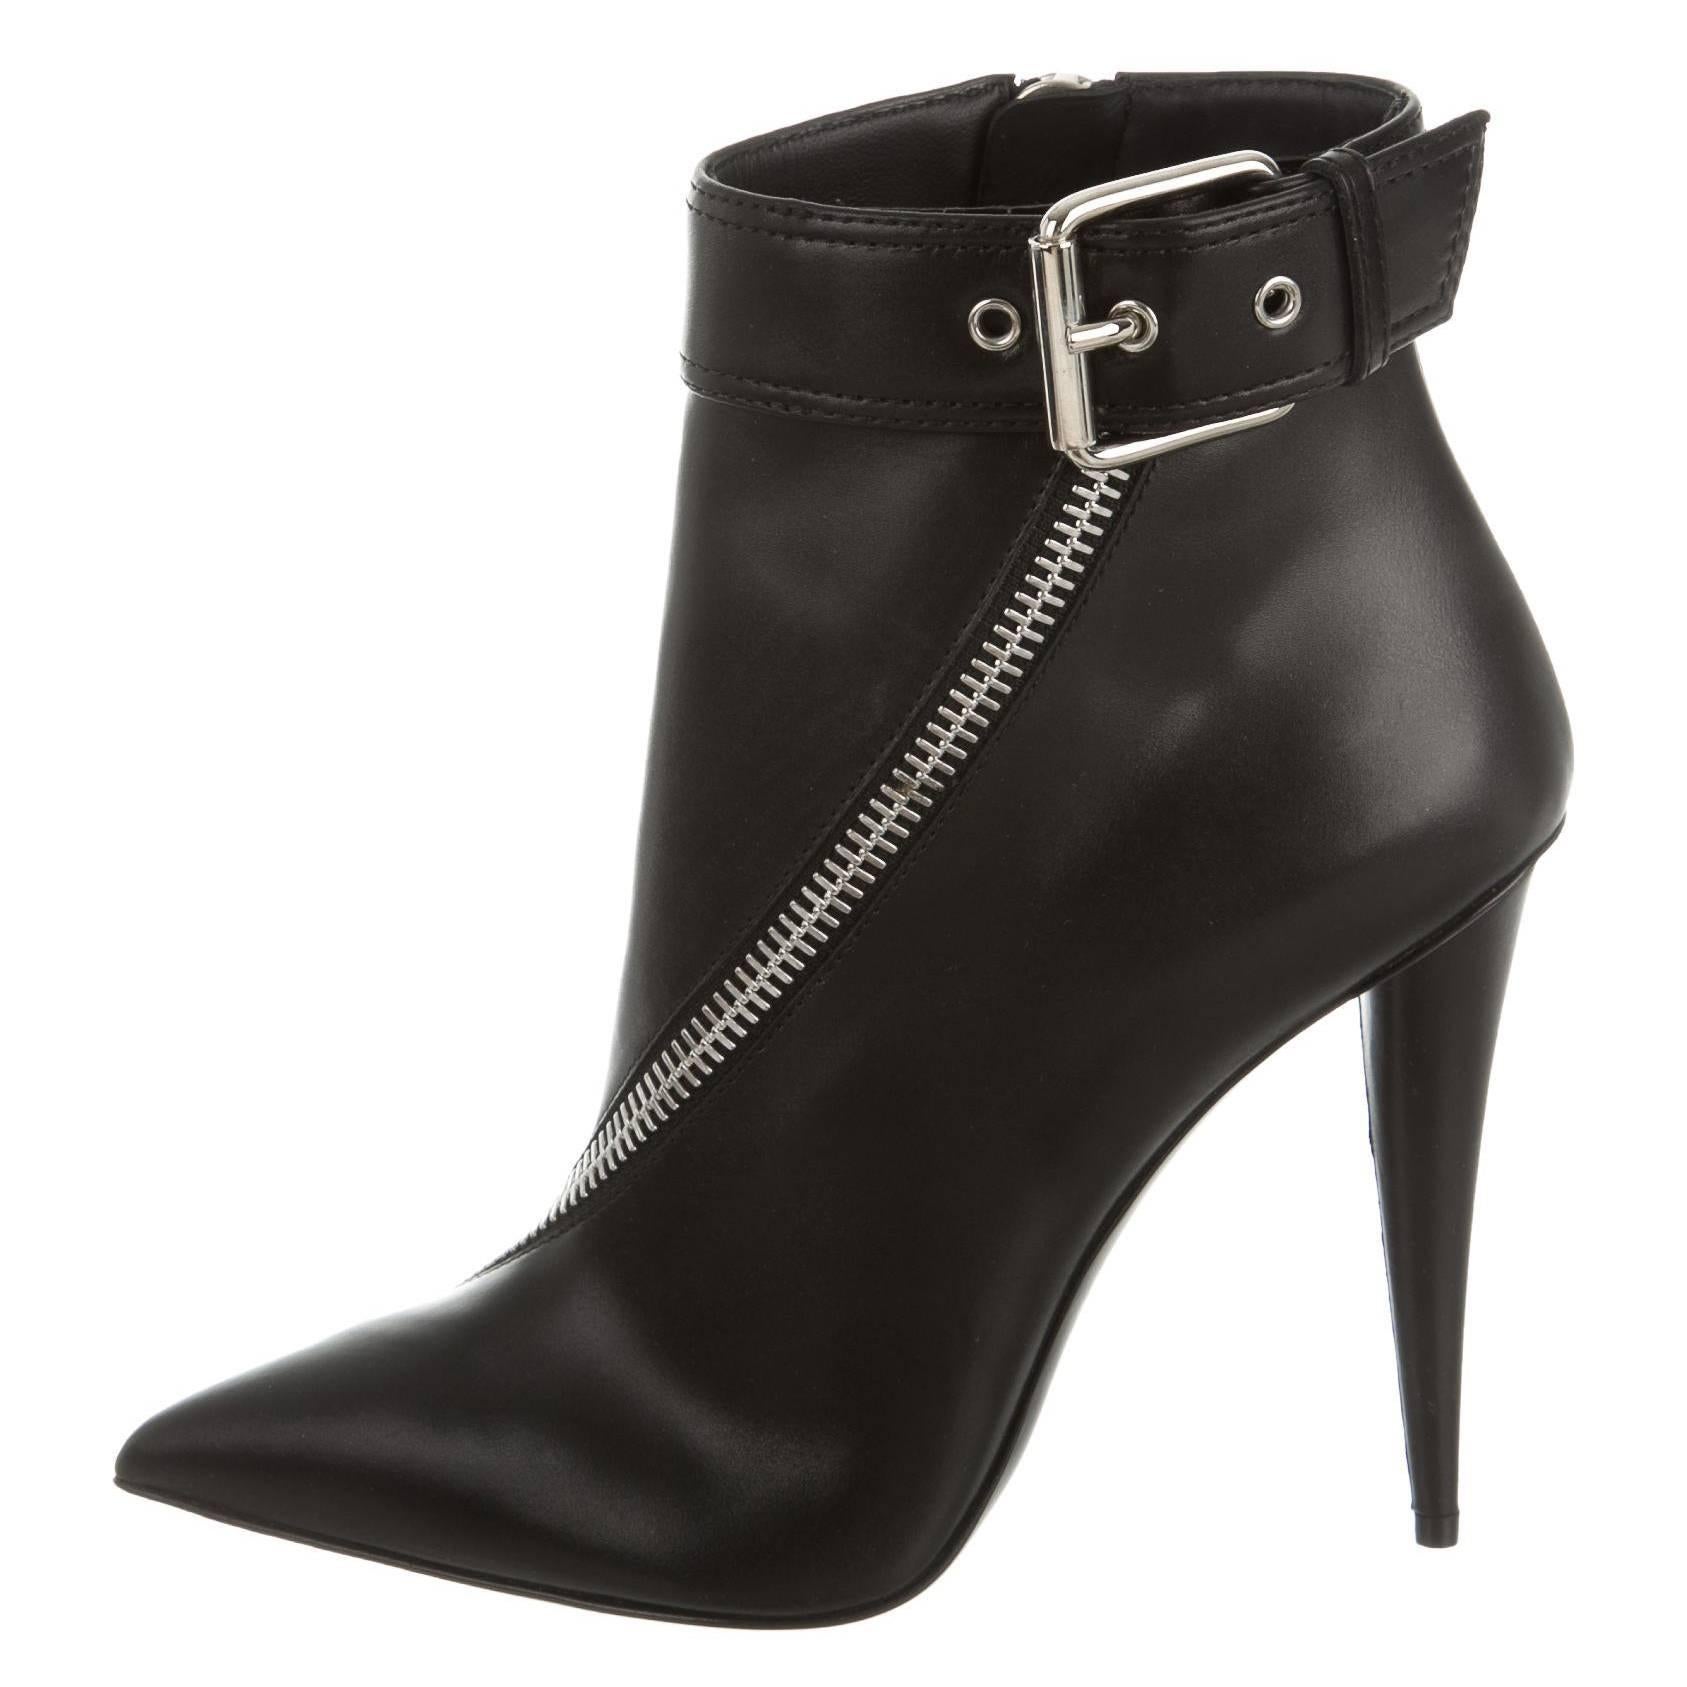 Giuseppe Zanotti NEW & SOLD OUT Black Leather Silver Ankle Booties in Box